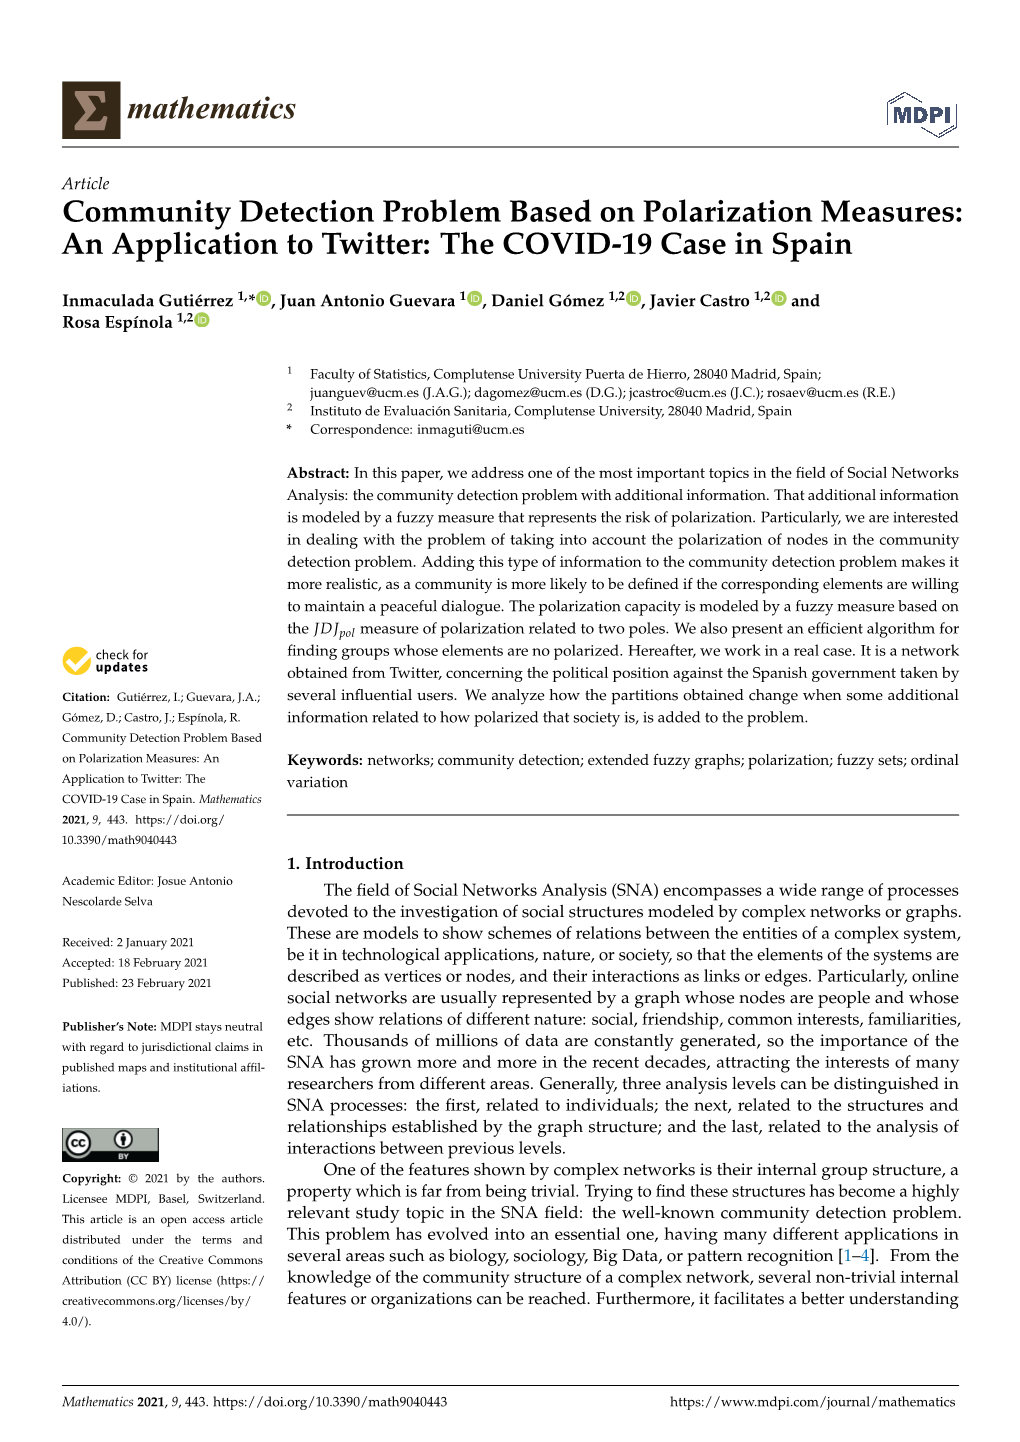 Community Detection Problem Based on Polarization Measures: an Application to Twitter: the COVID-19 Case in Spain